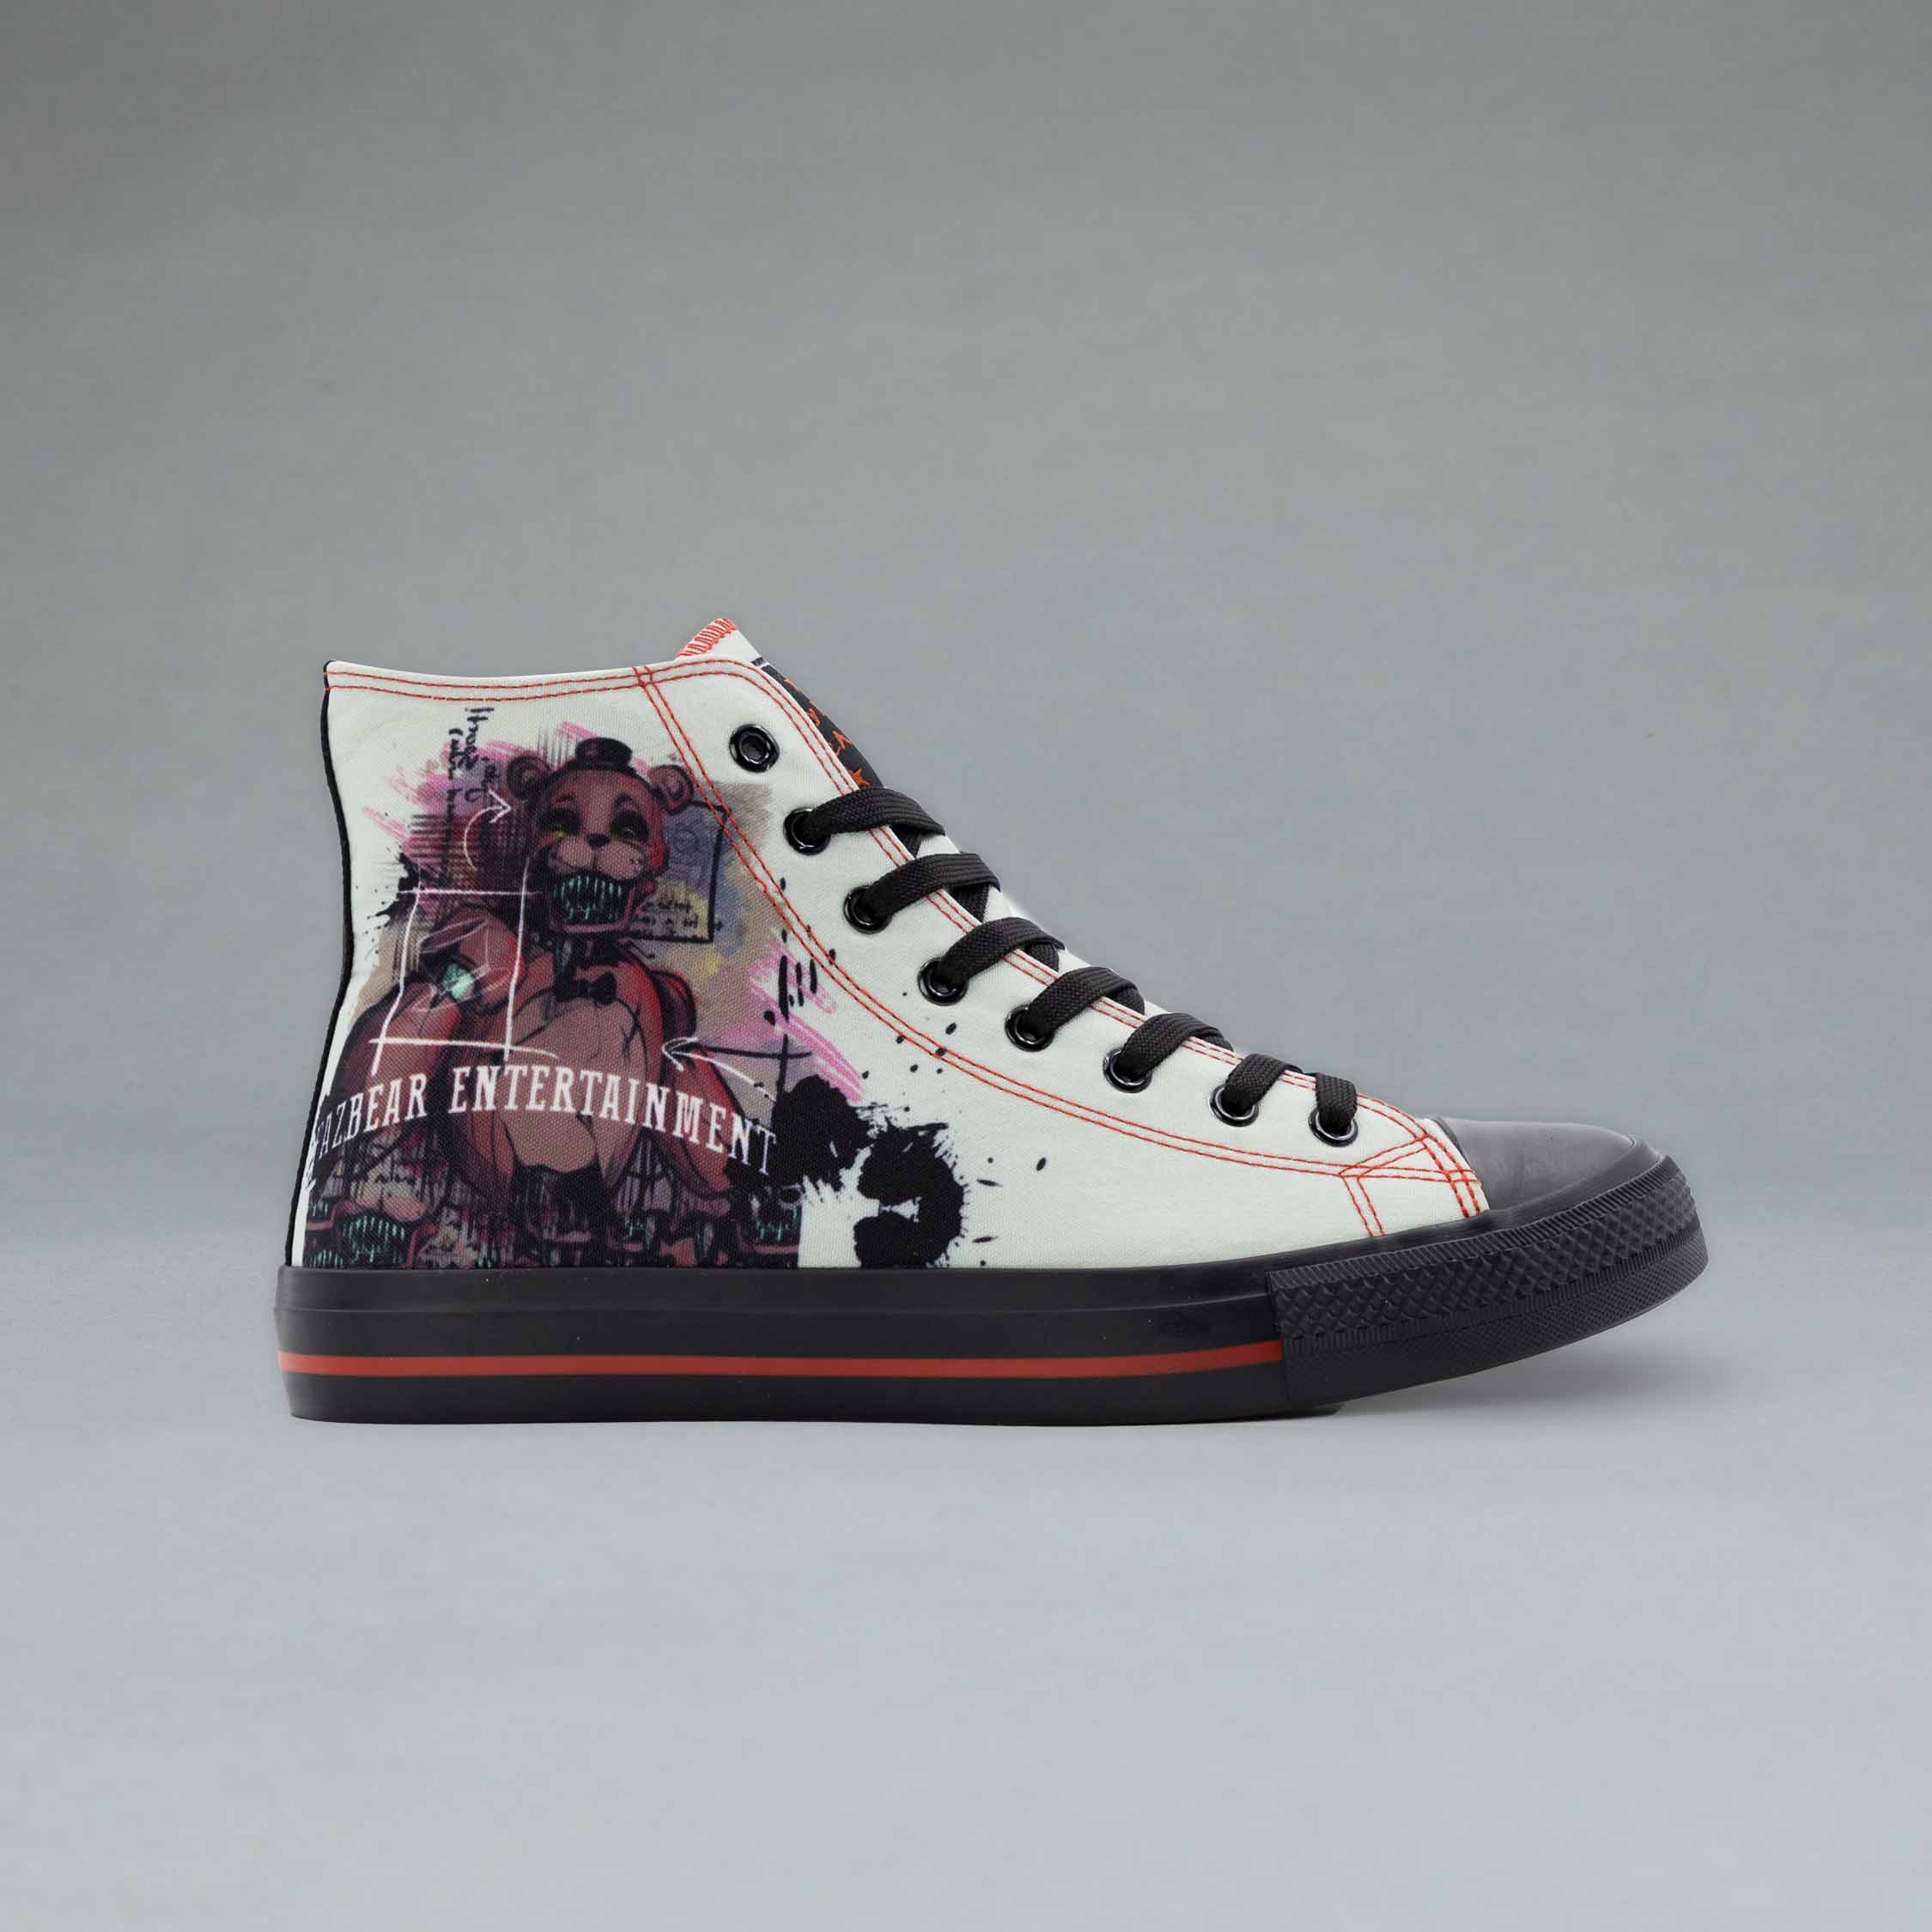 Discover 193+ the walking dead sneakers